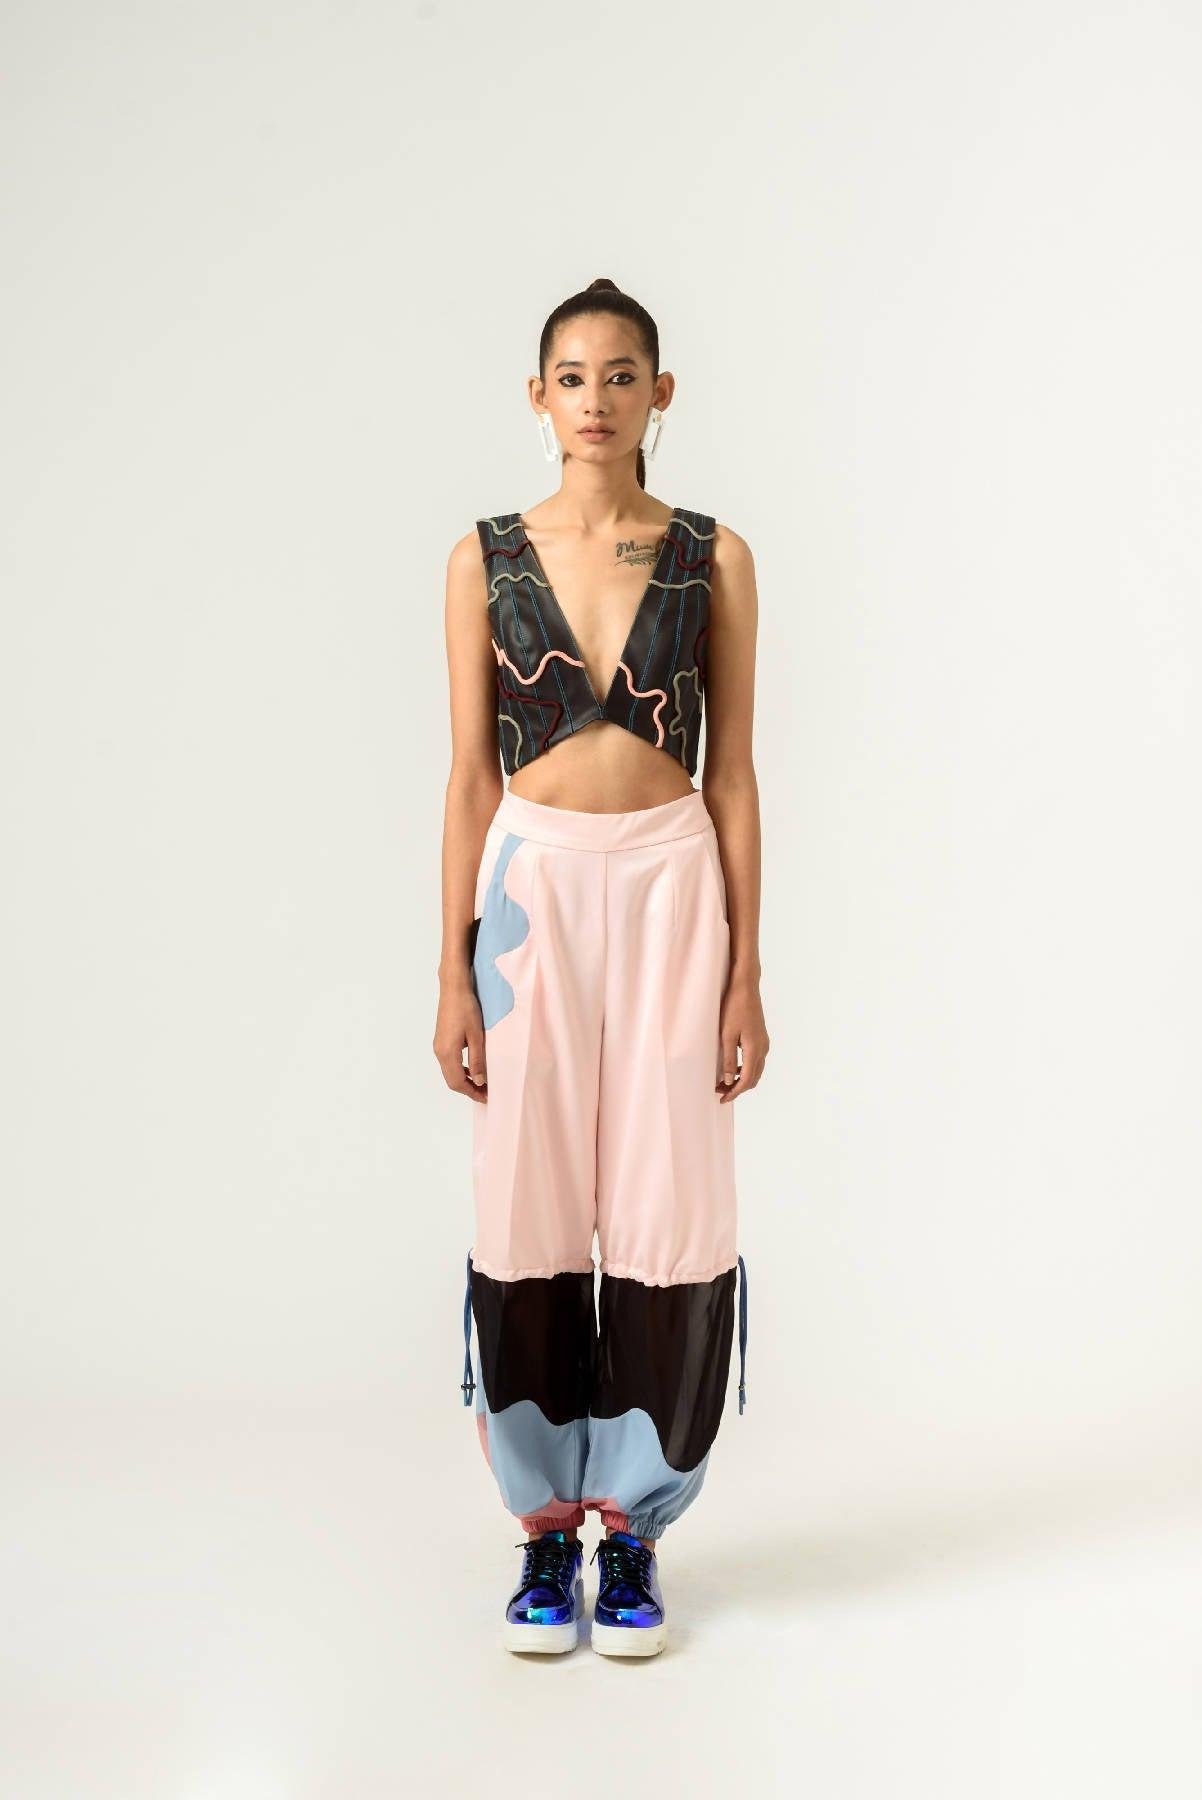 Leather Patched Bustier by SIDDHANT AGRAWAL LABEL